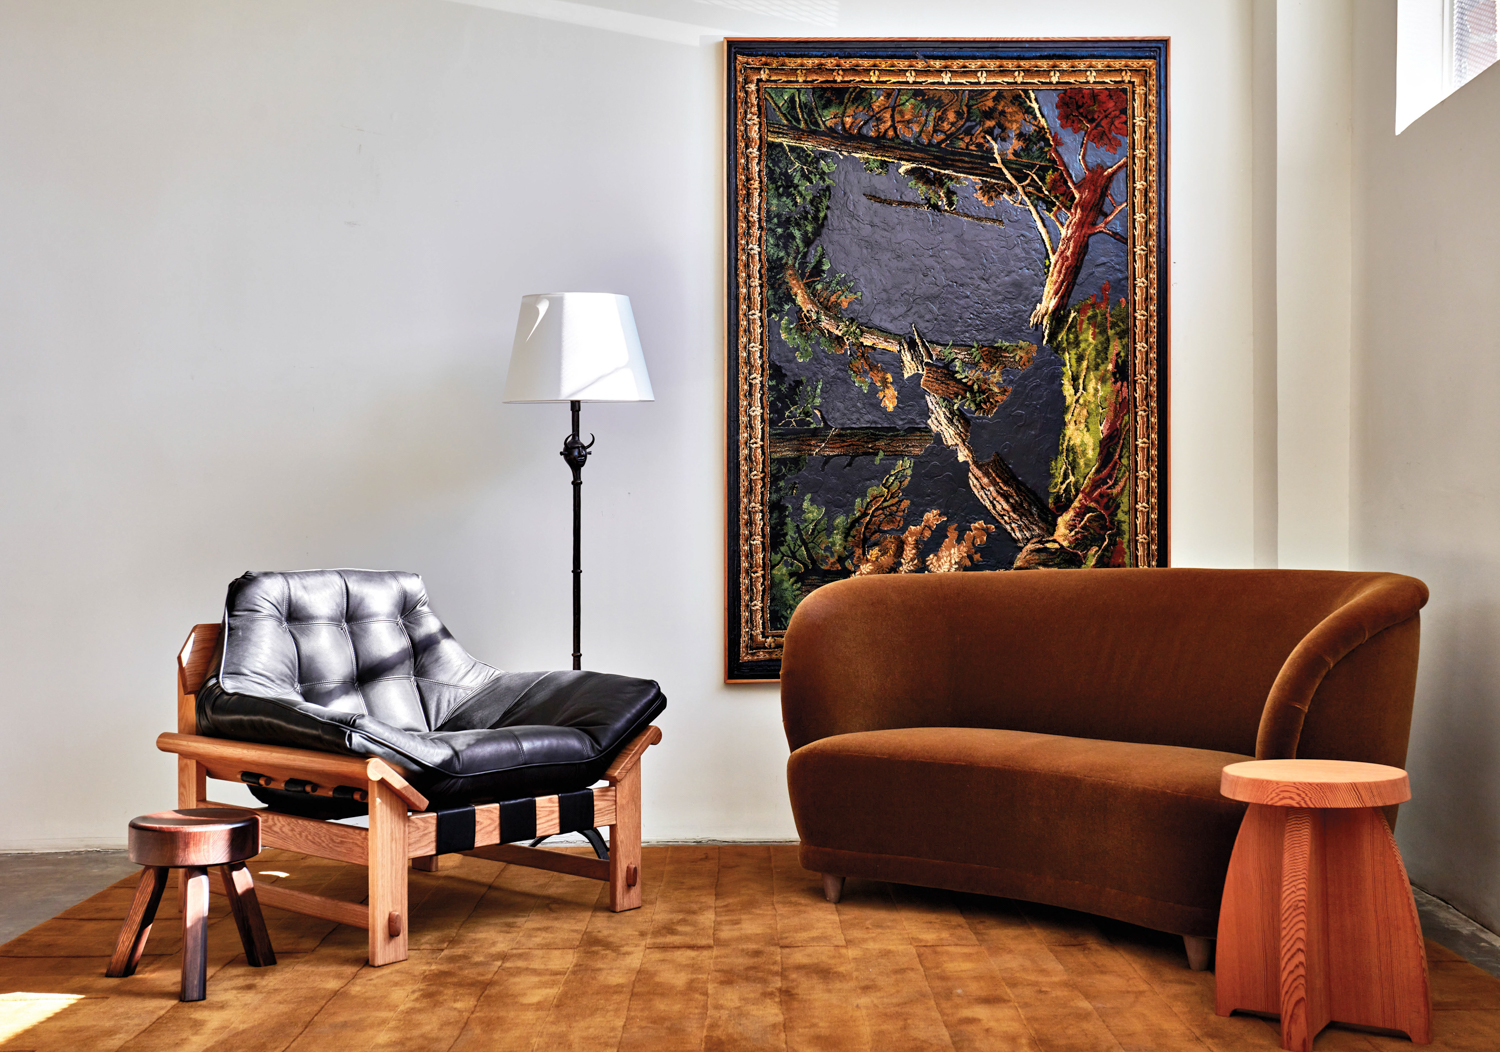 The Expert showroom with a leather-and-wood armchair facing a brown, curved sofa under a tapestry